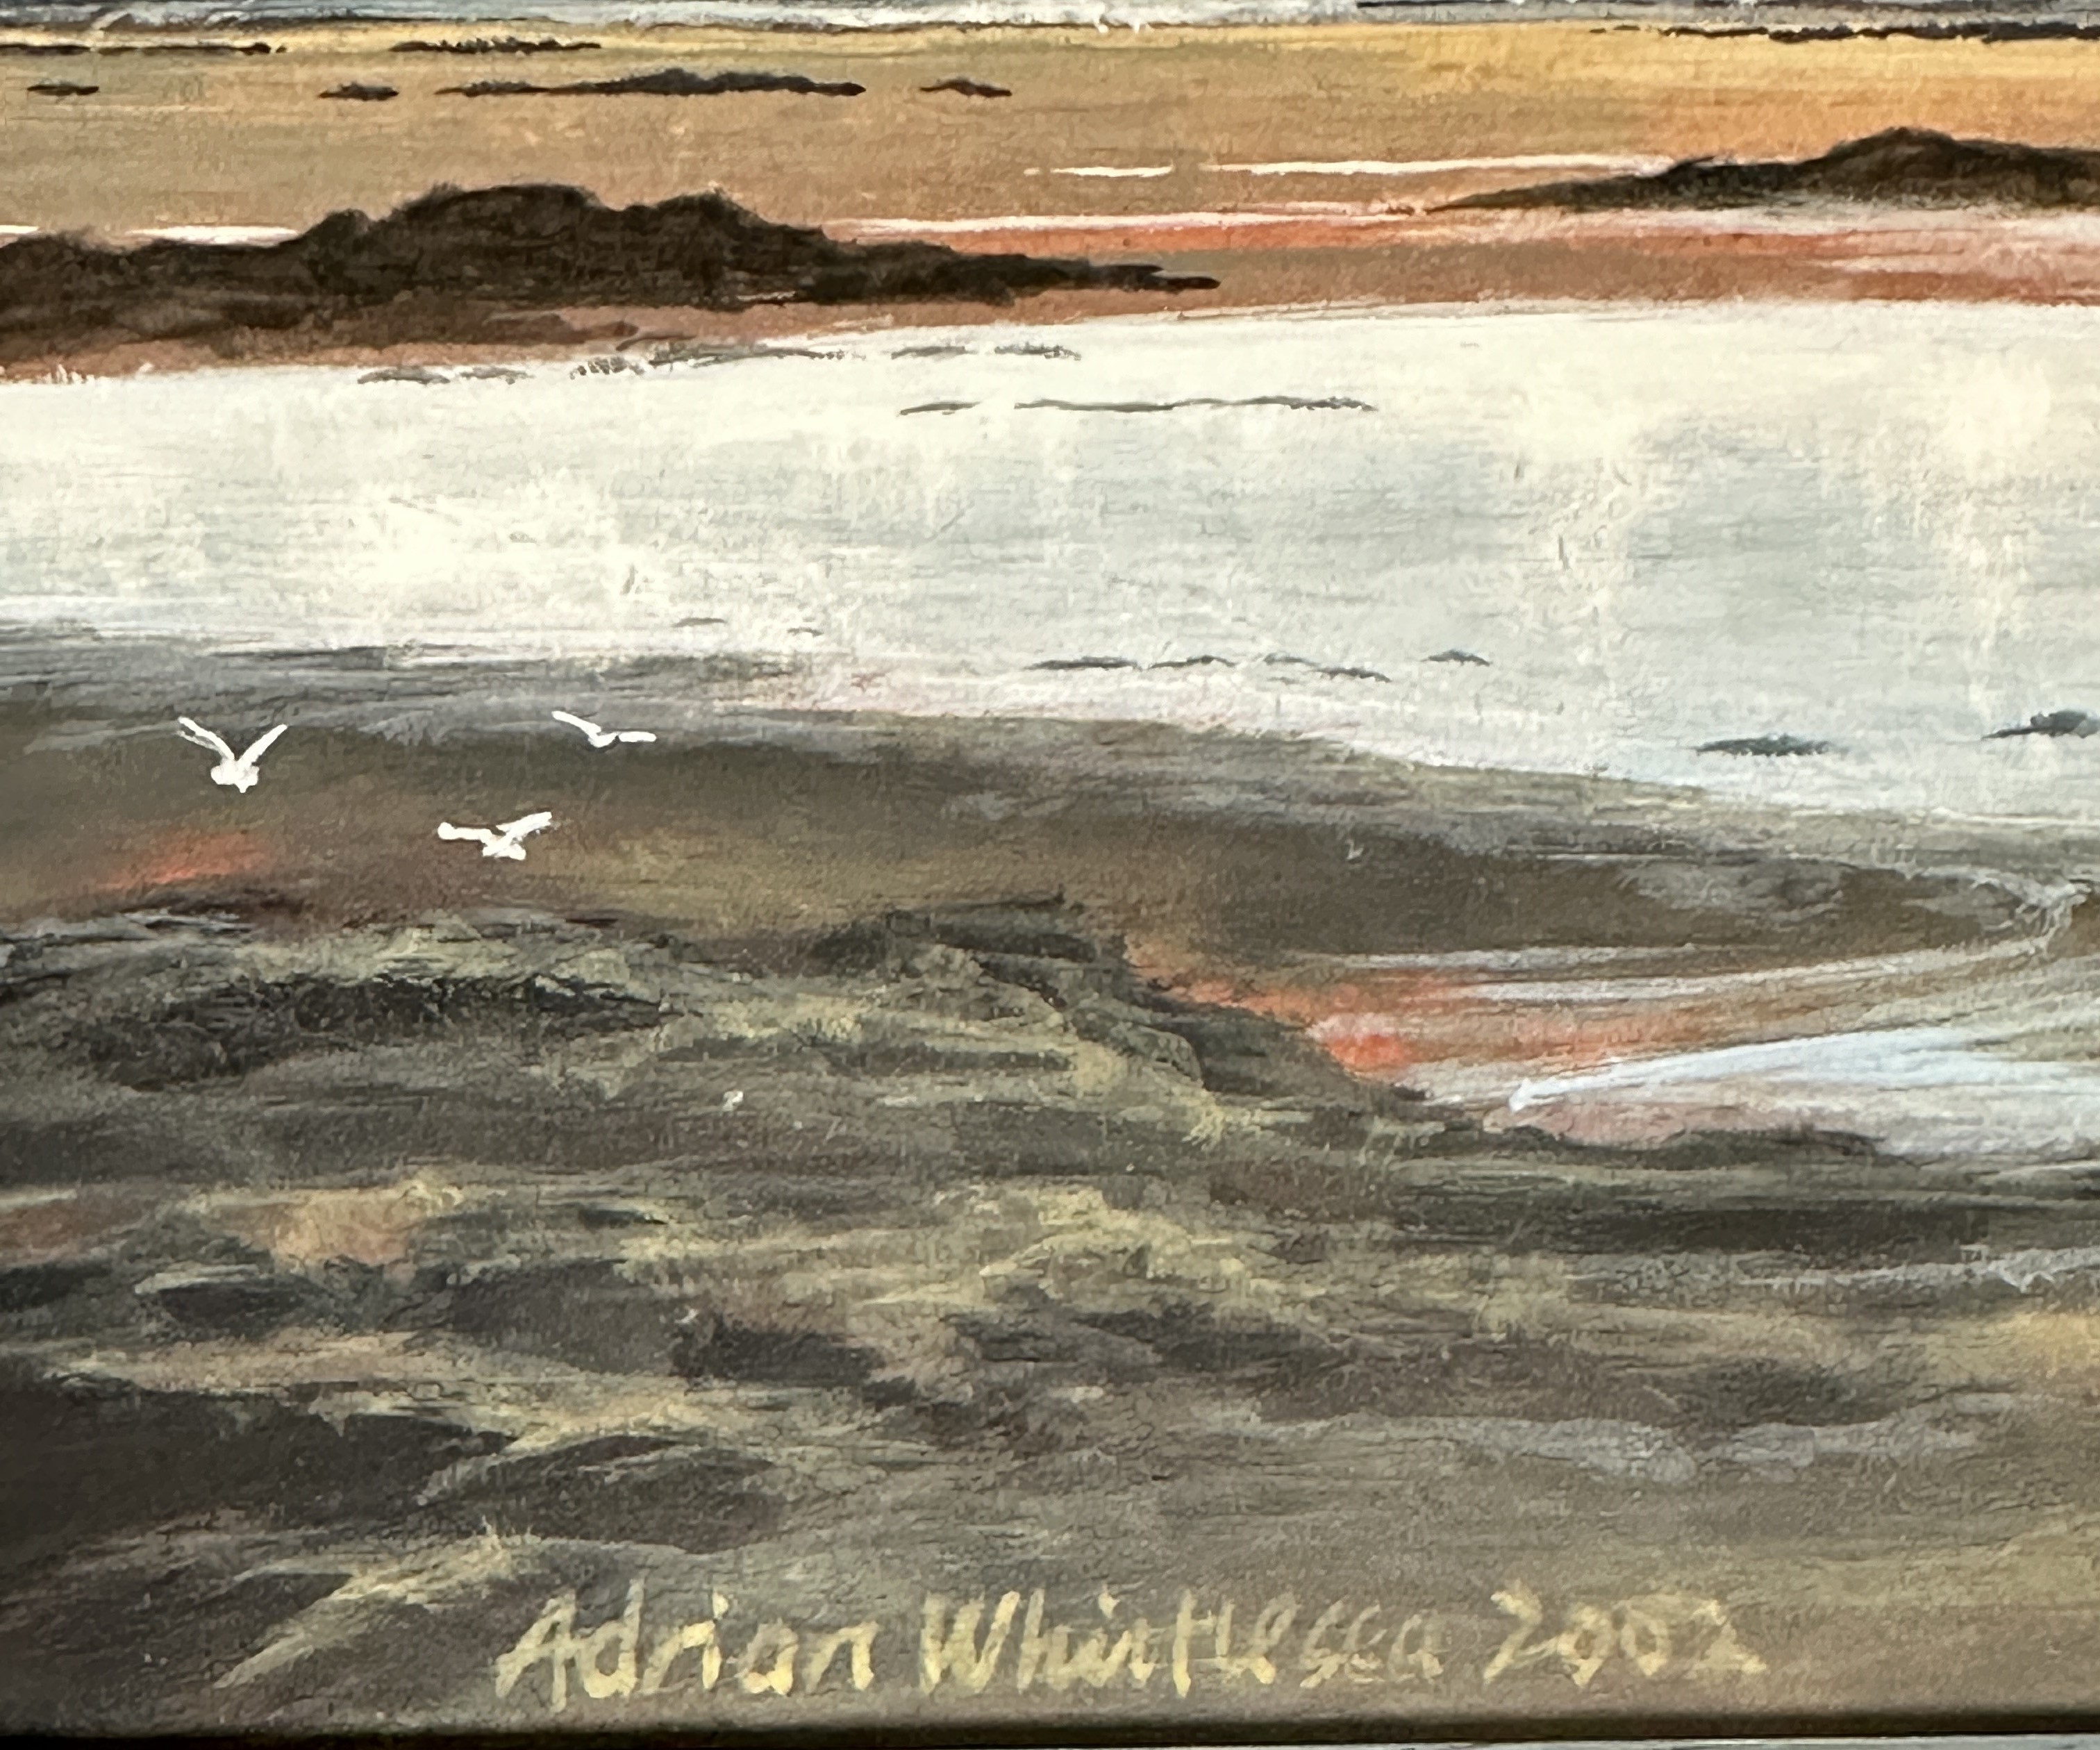 Adrian Whittlesea, British, Low tide, Coll Inner Hebrides, acrylic on wood, signed and dated 2002 in - Image 2 of 4